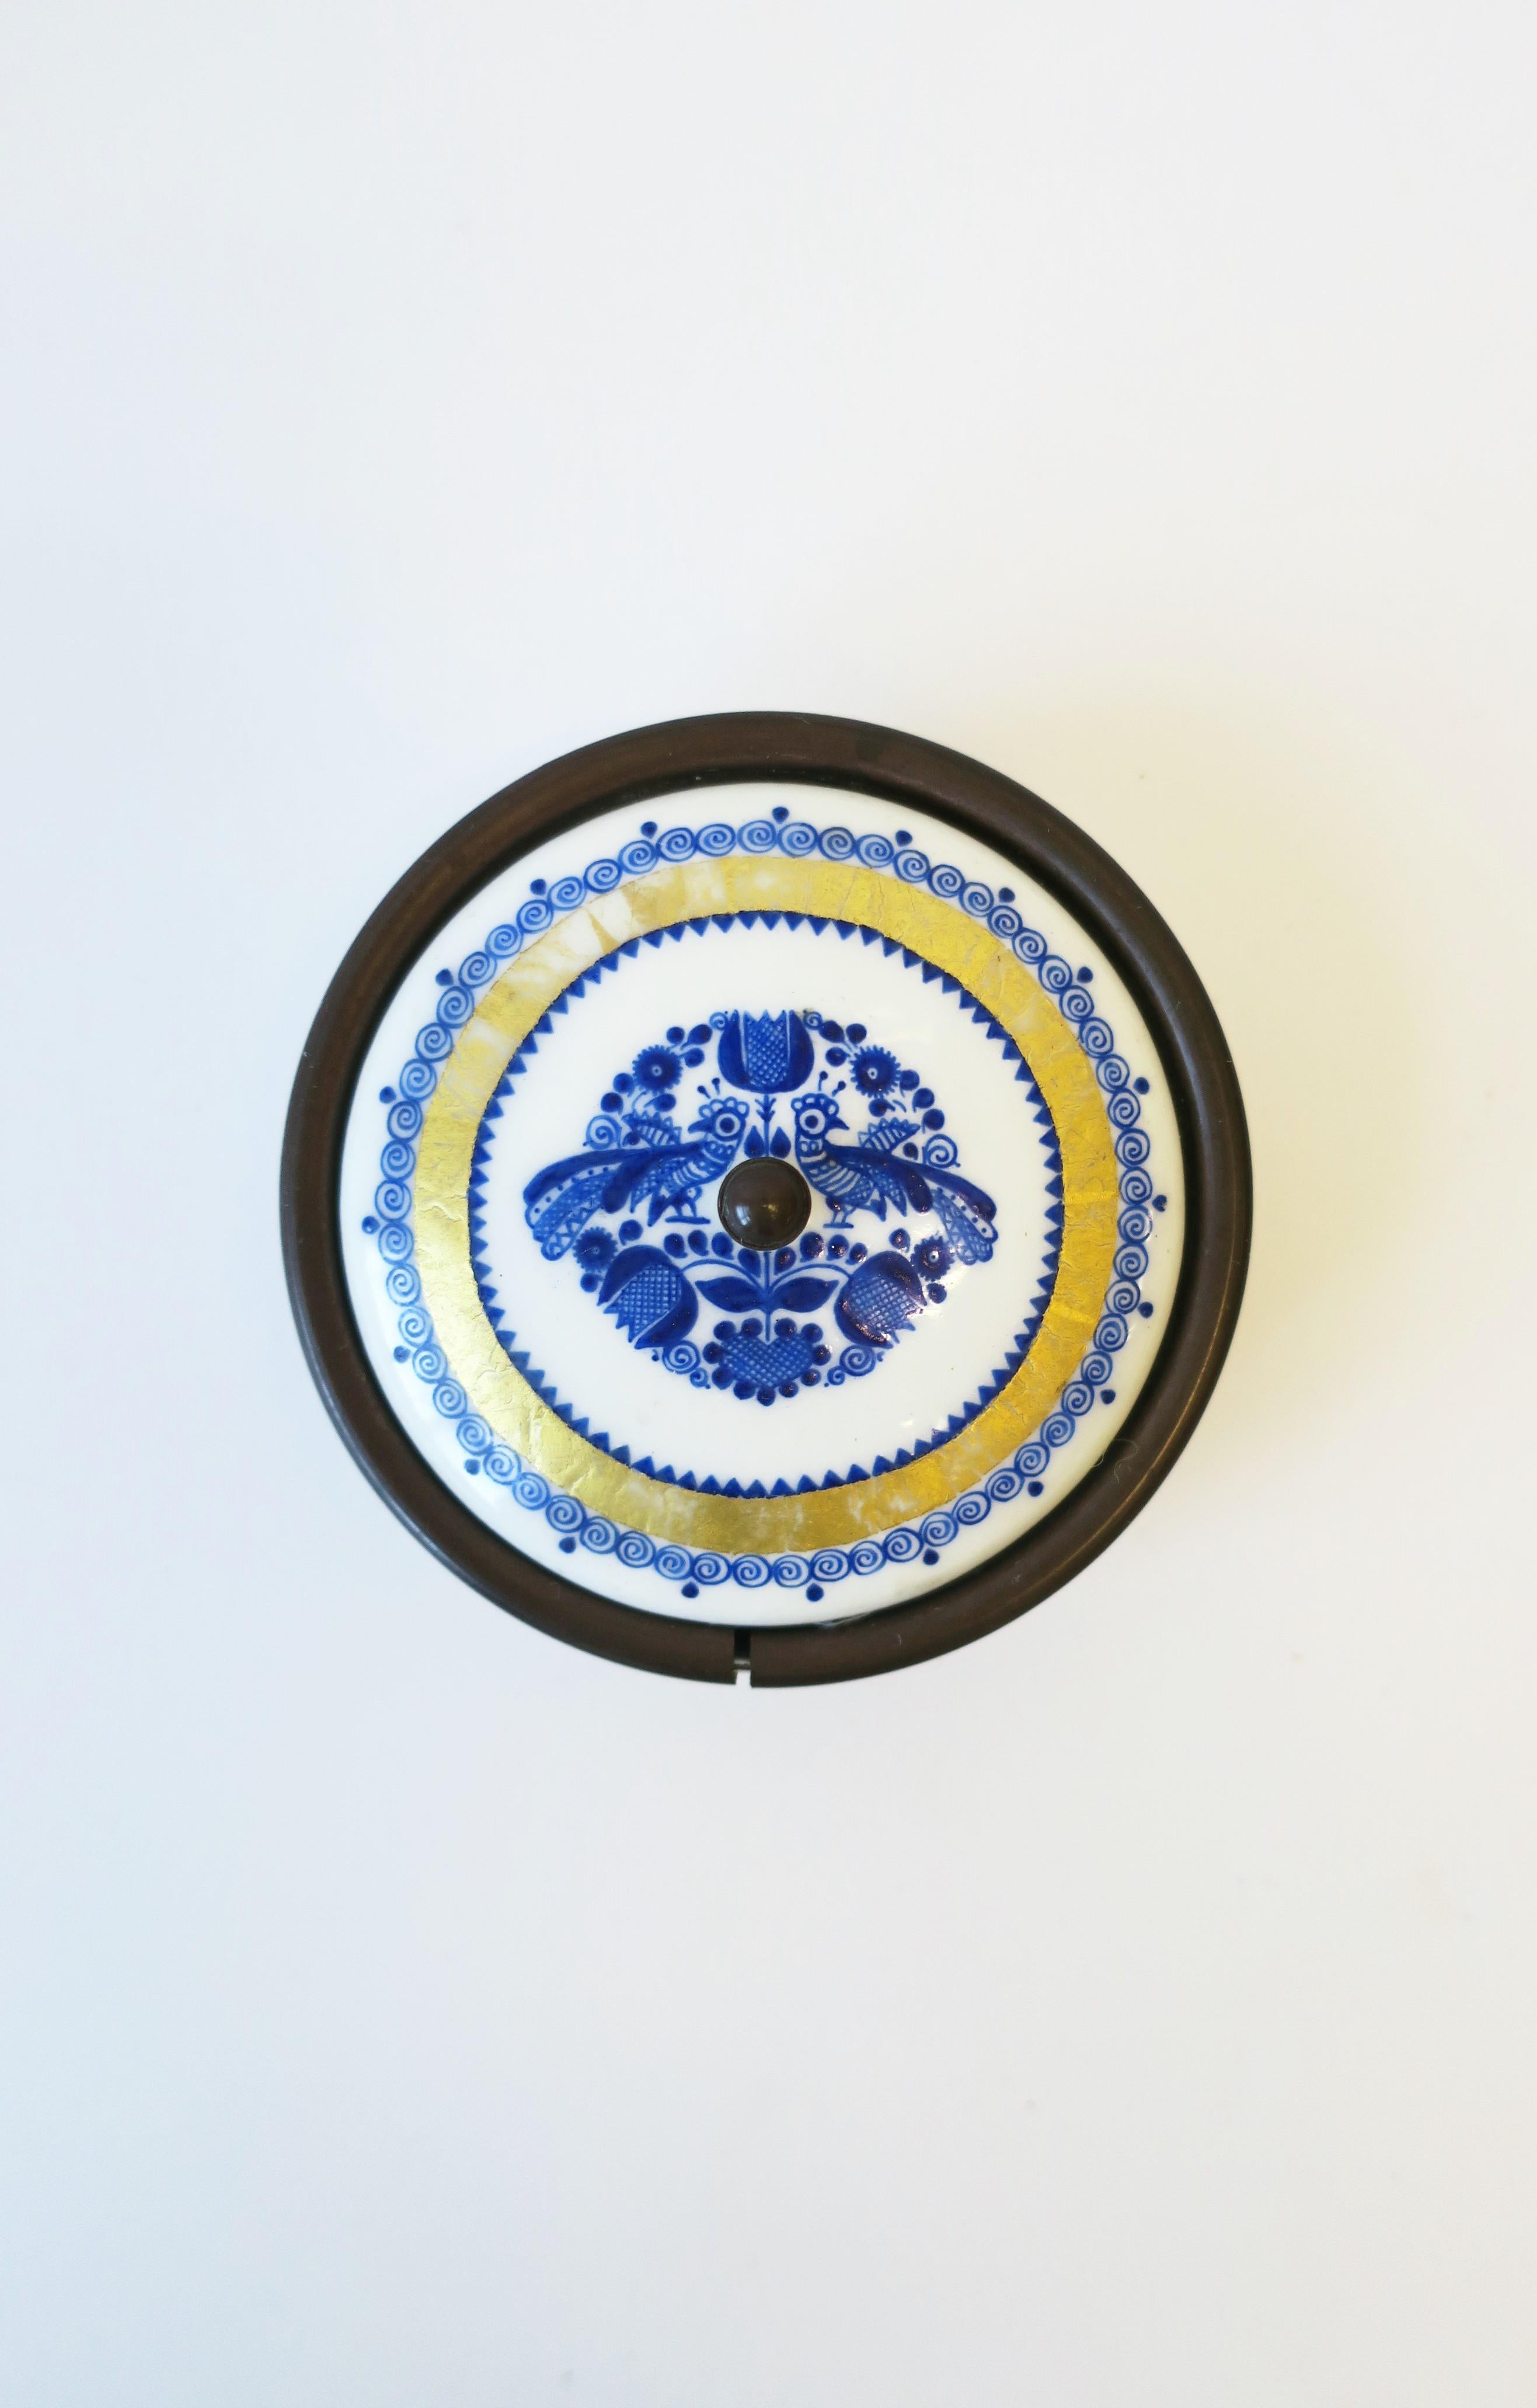 An Austrian blue, white, and gold porcelain enamel small box and lid by Black, Starr & Gorham, circa early-20th century, Austria. Box has detailed design of peacock birds, flowers, leaves and swirls. Marked 'Black, Starr & Gorham', 'Austria', on